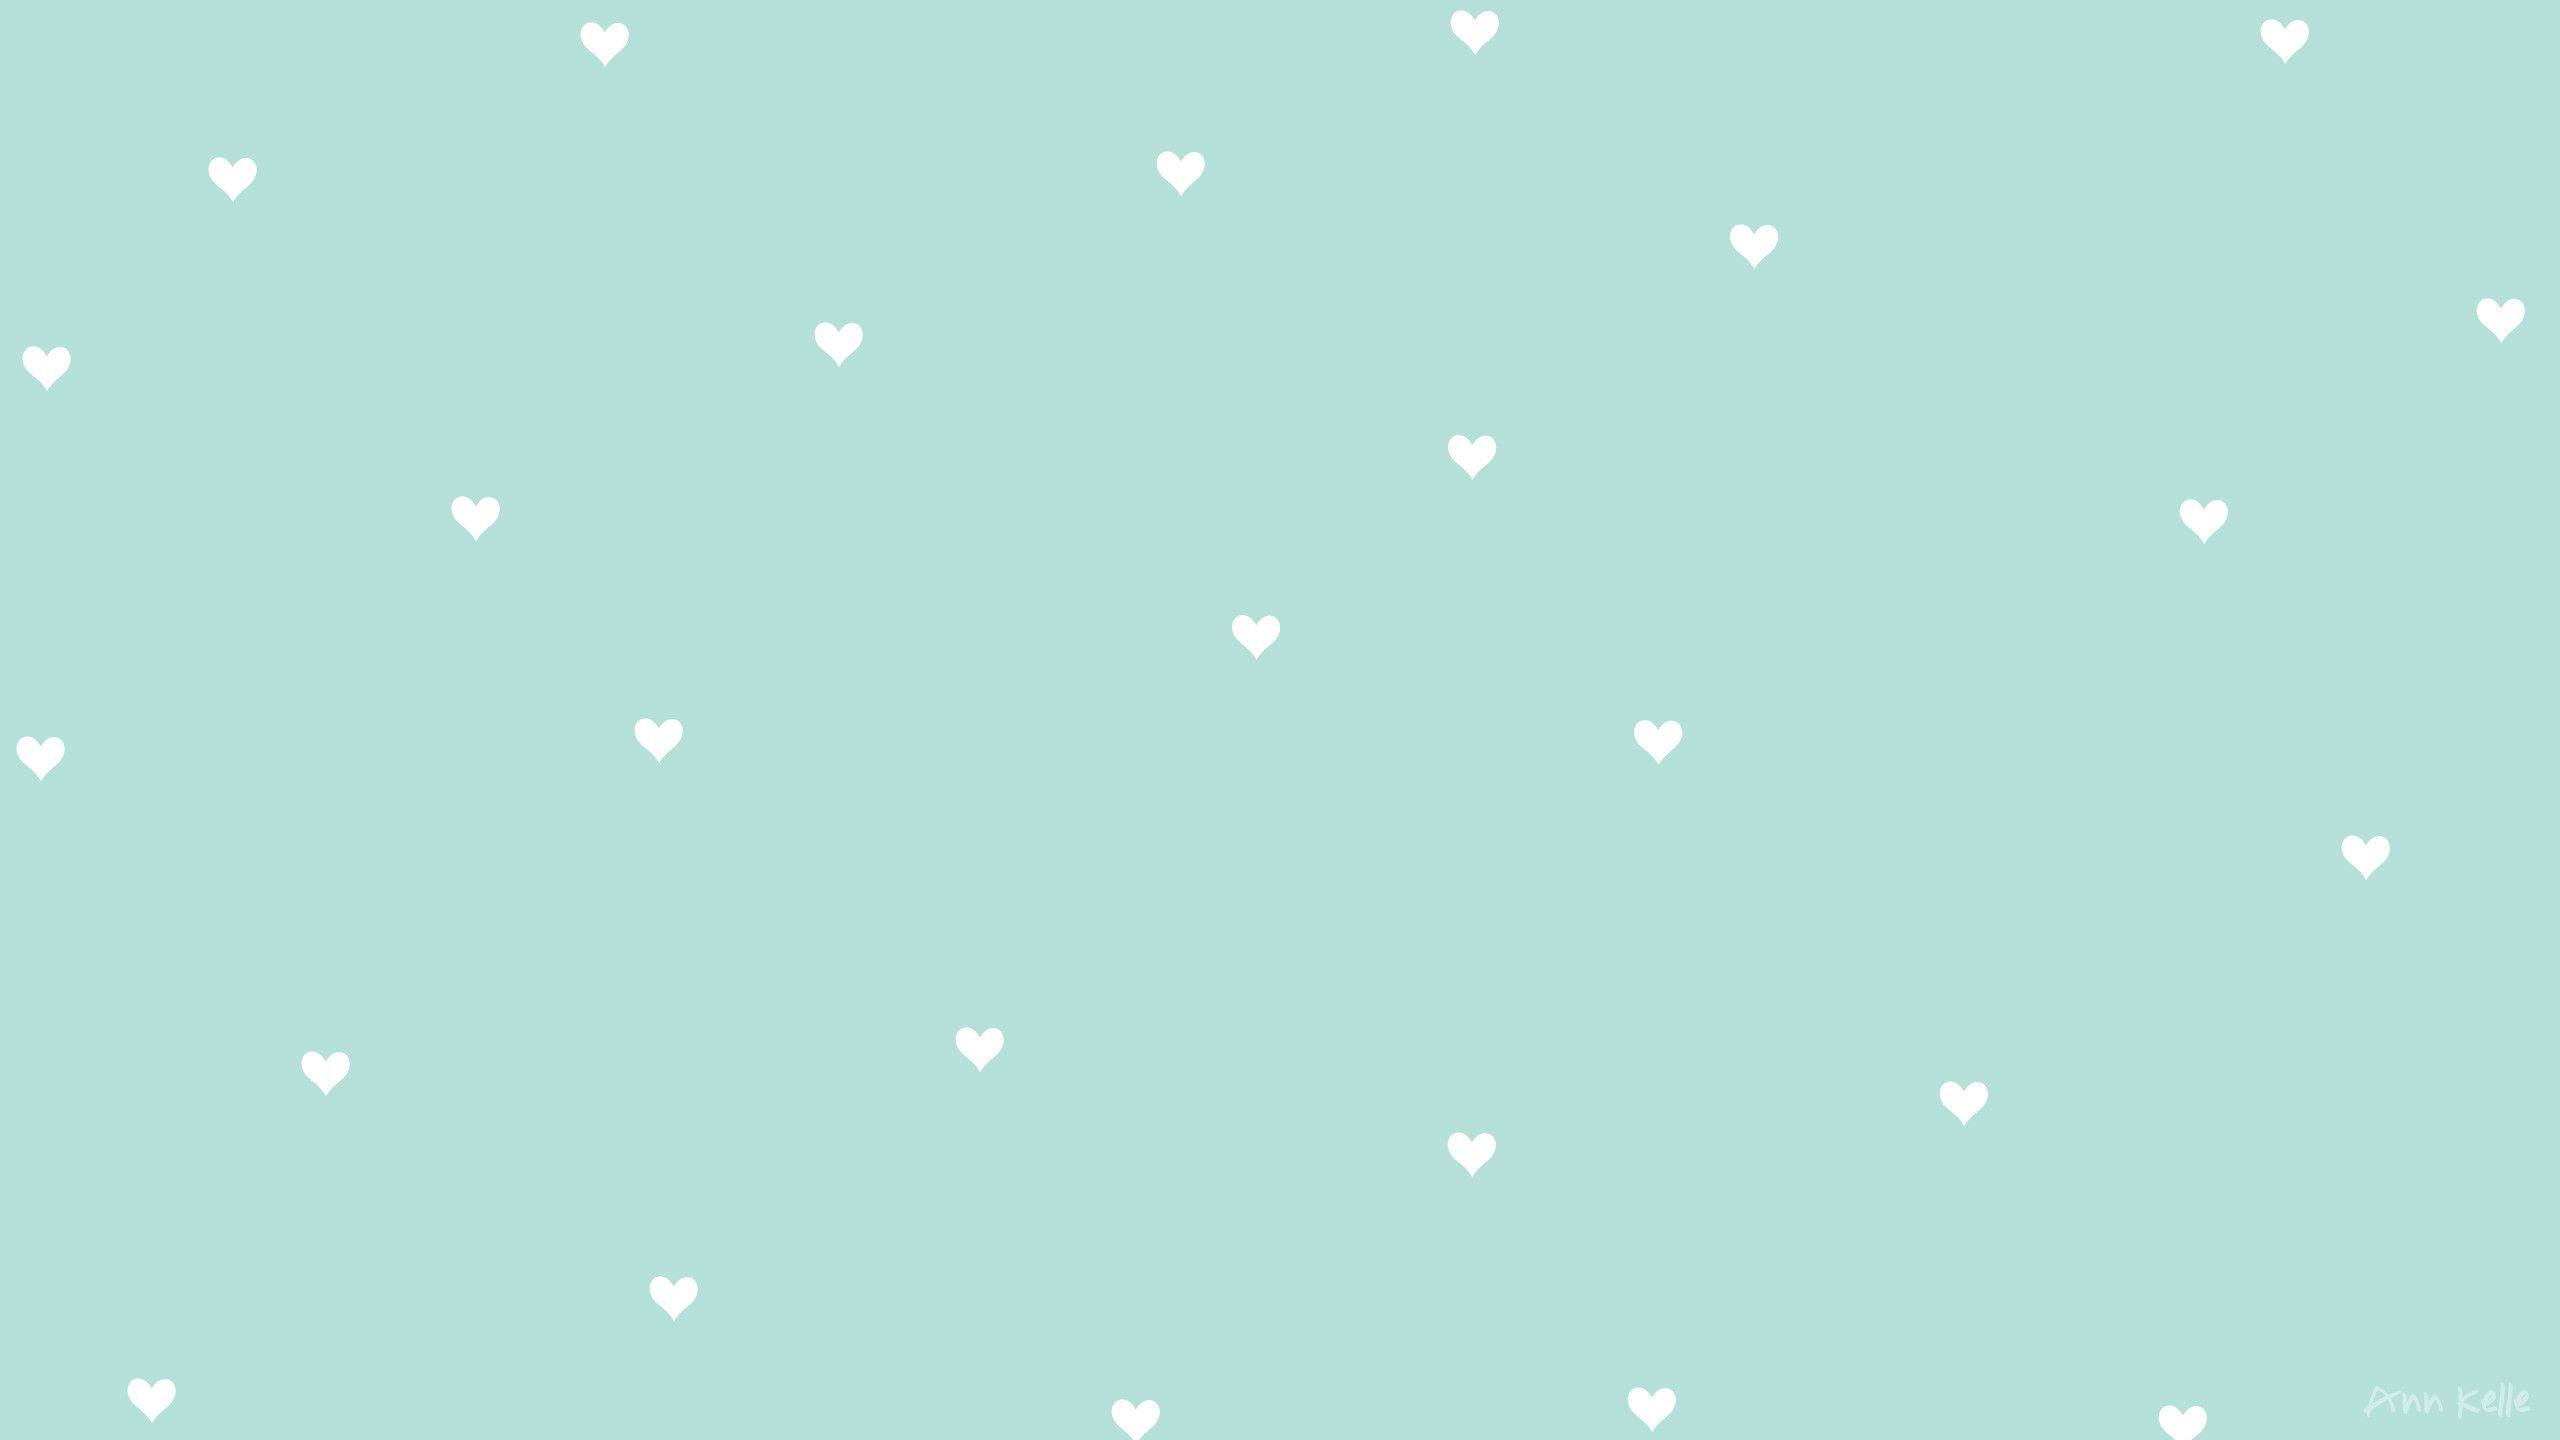 Pastel Green Aesthetic Wallpapers - Top Free Pastel Green Aesthetic